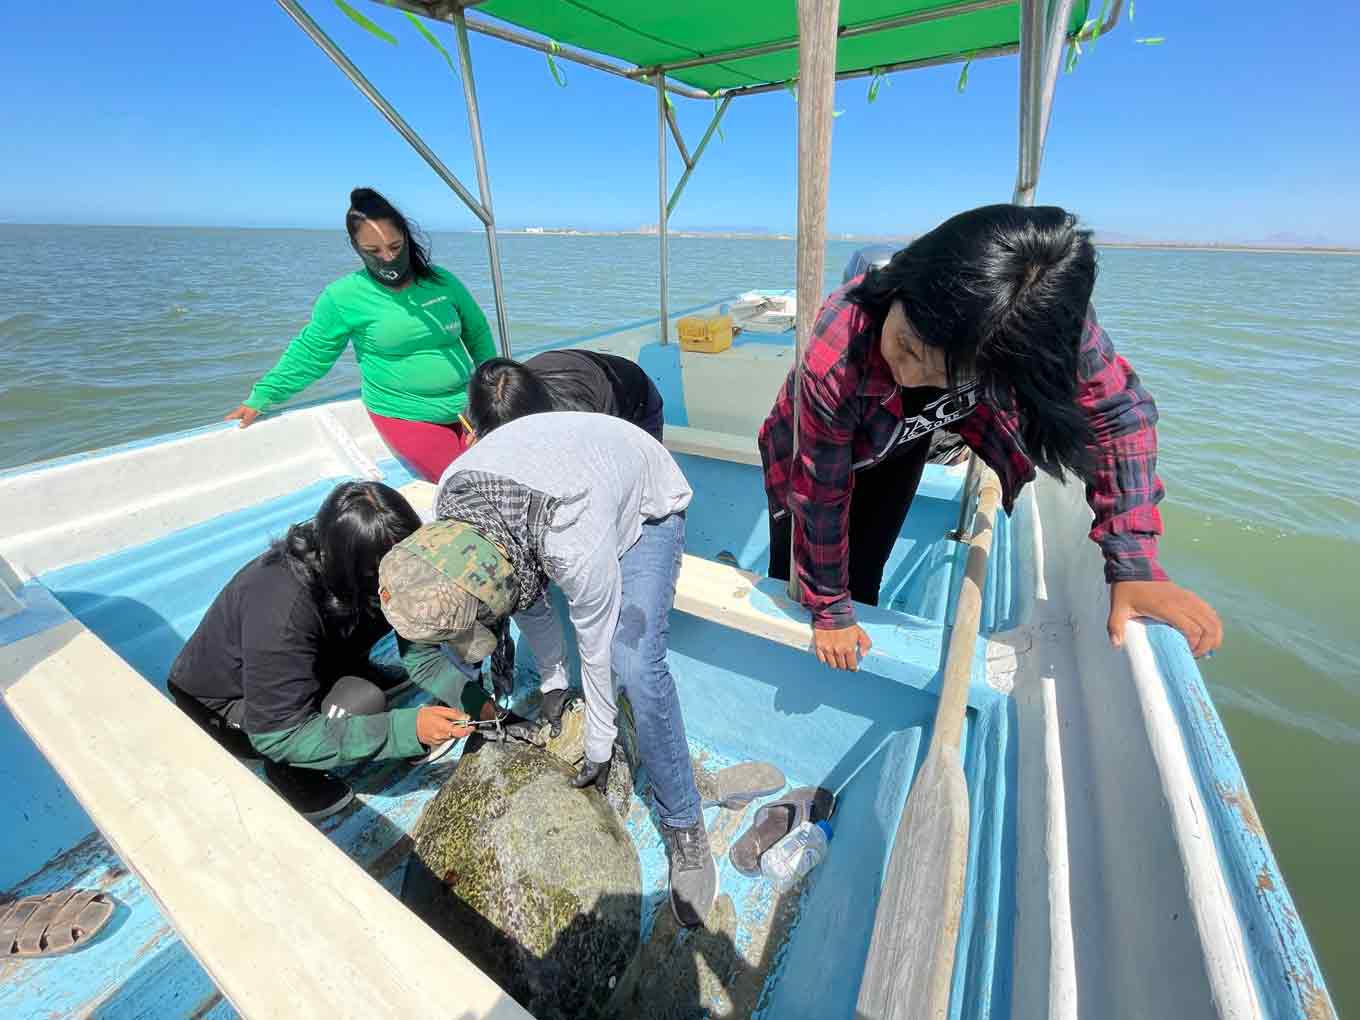 Volunteers trying to idenfity a recaptured green sea turtle while standing on a boat